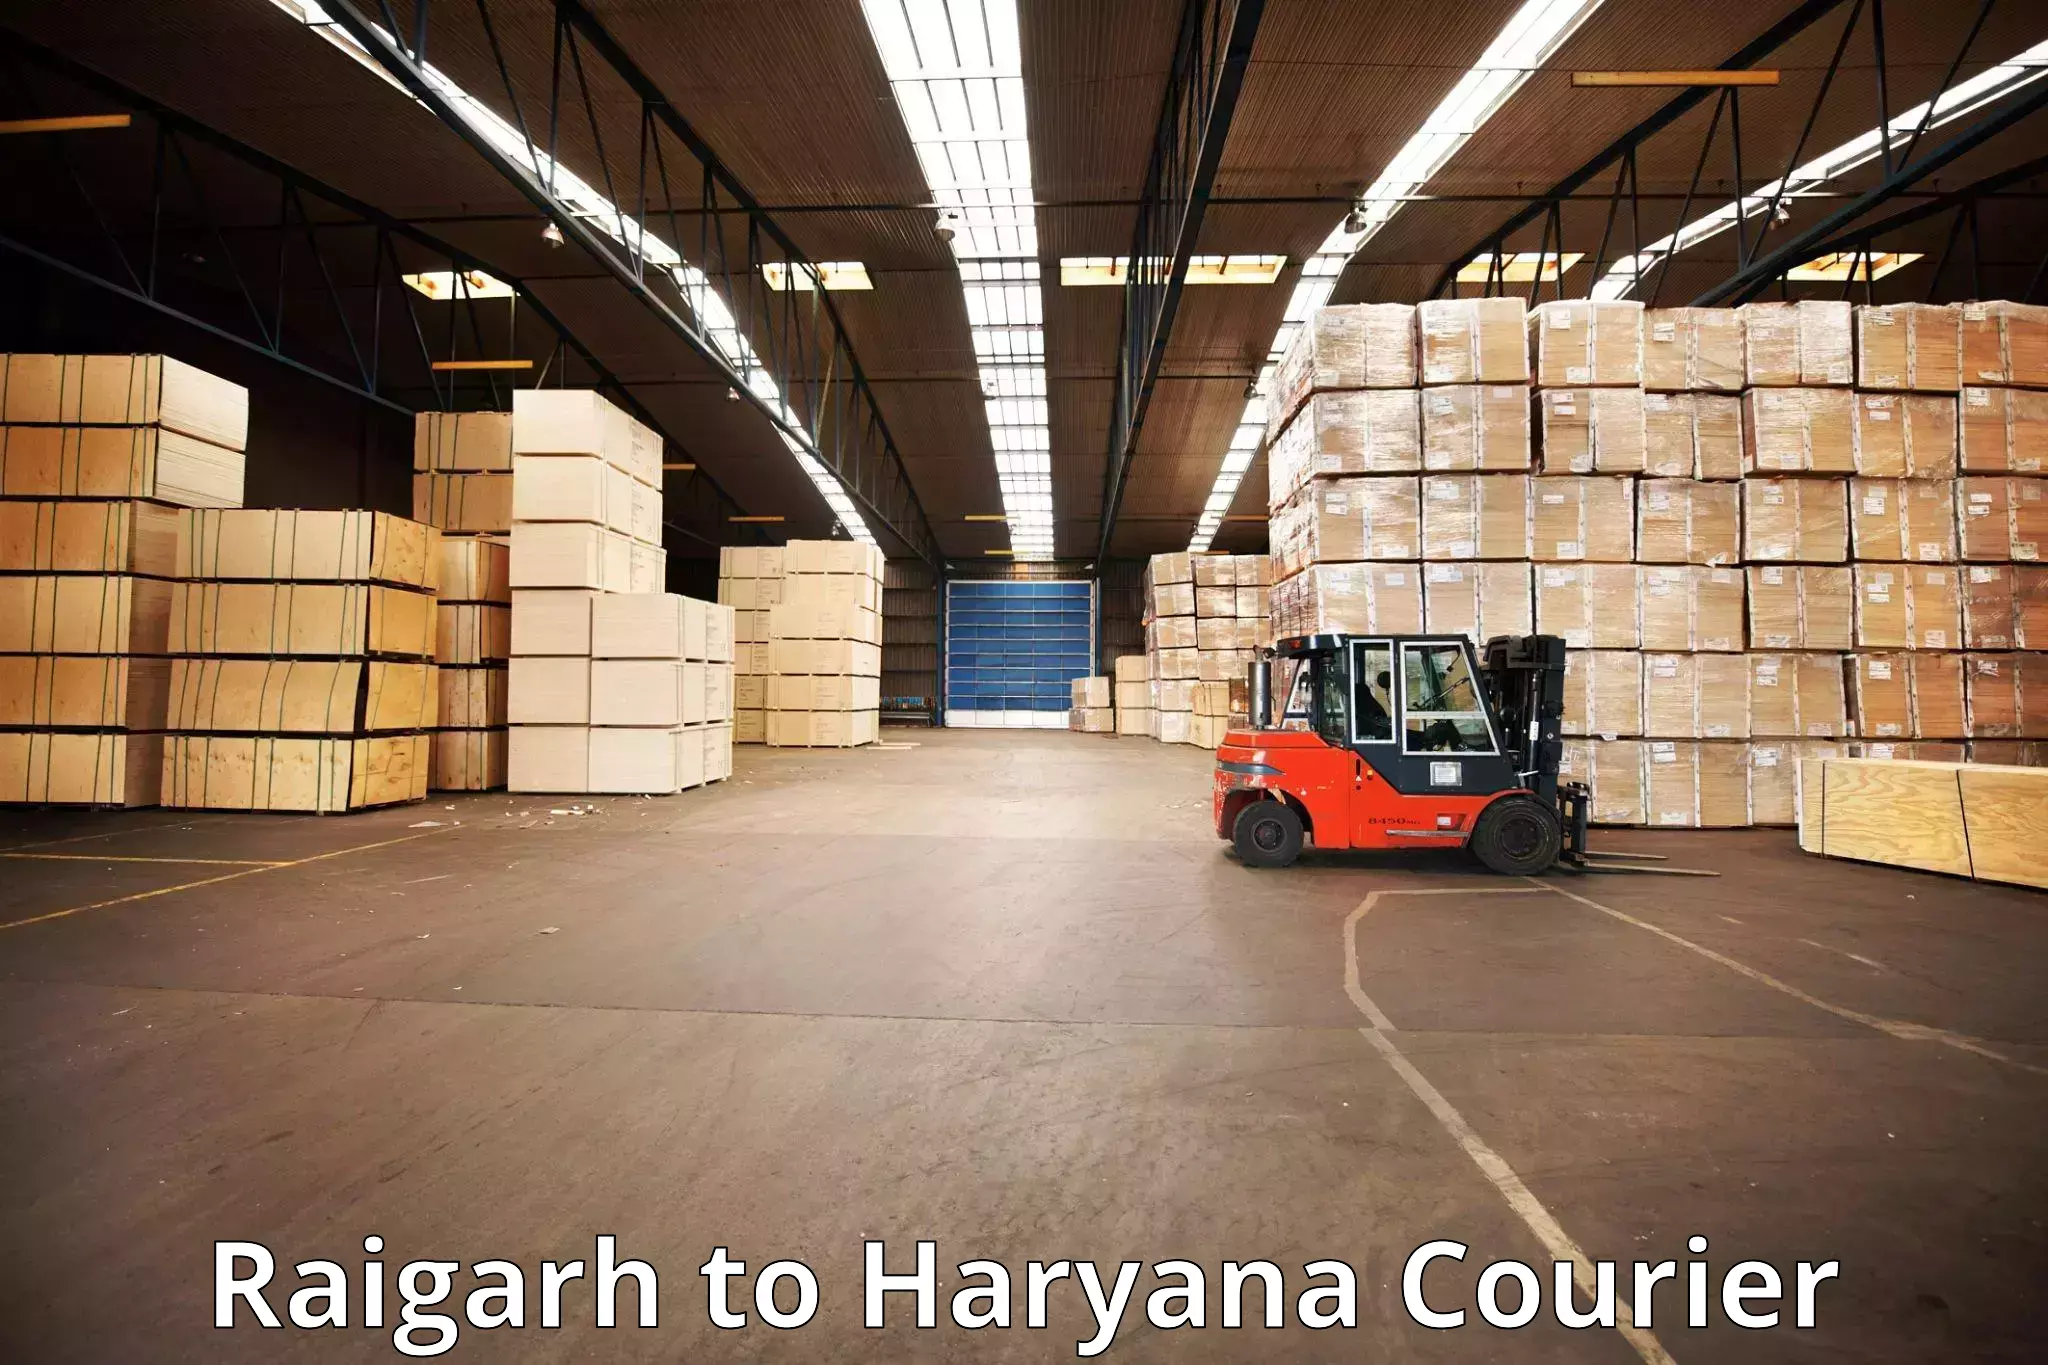 Luggage shipment specialists Raigarh to Chaudhary Charan Singh Haryana Agricultural University Hisar